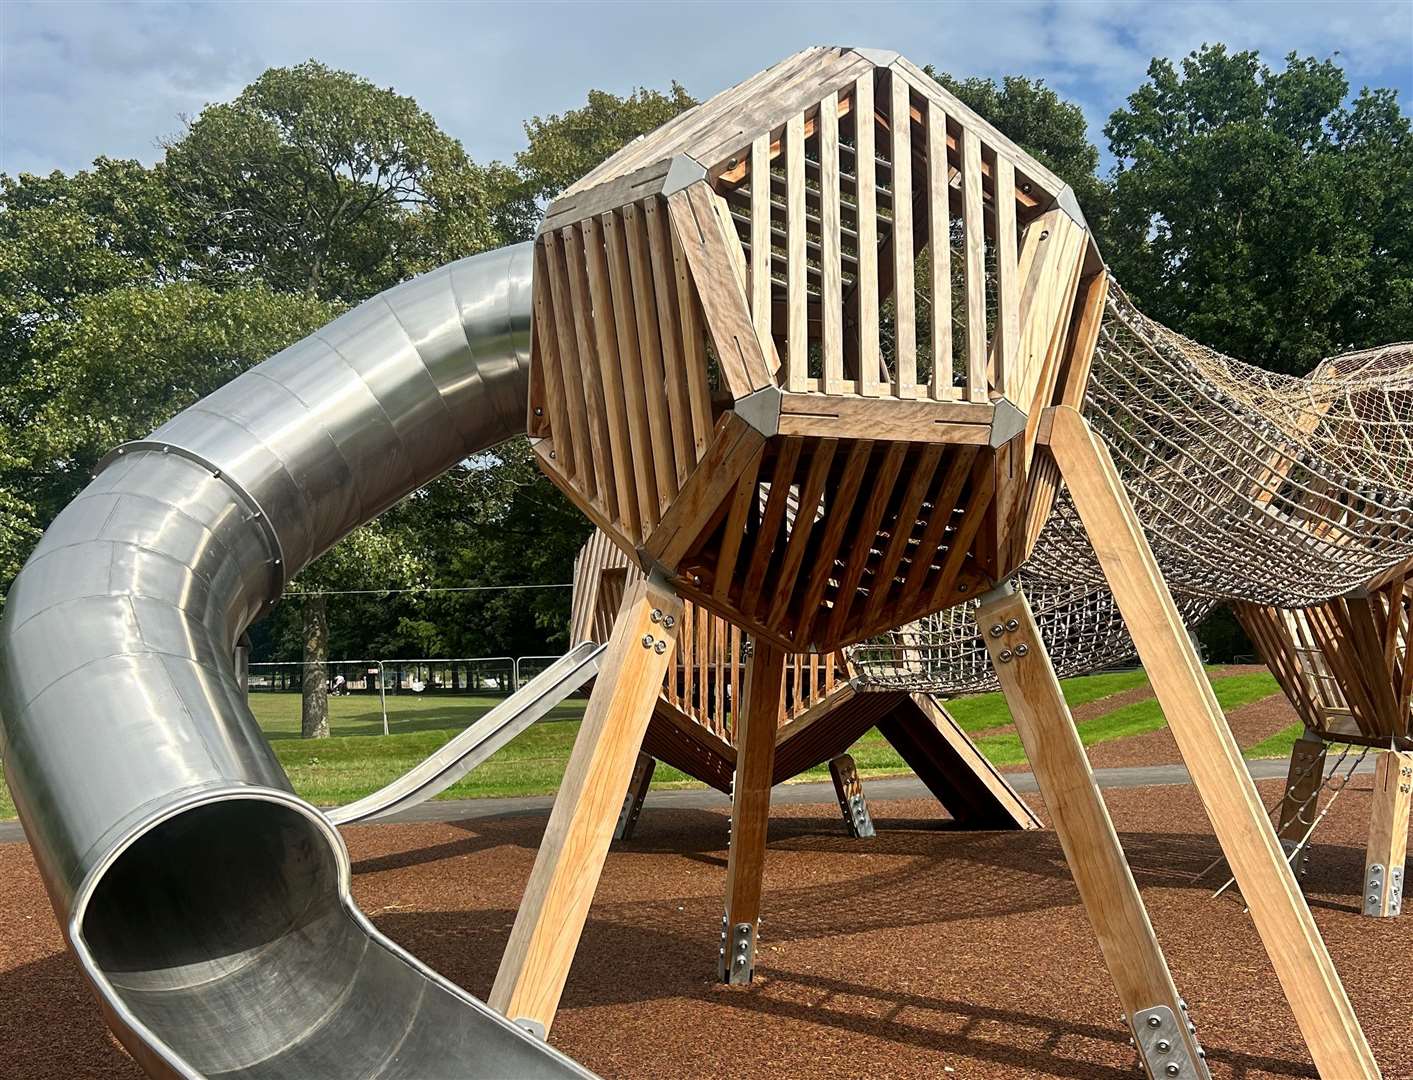 The new play equipment at the site. Picture: Ashford Borough Council